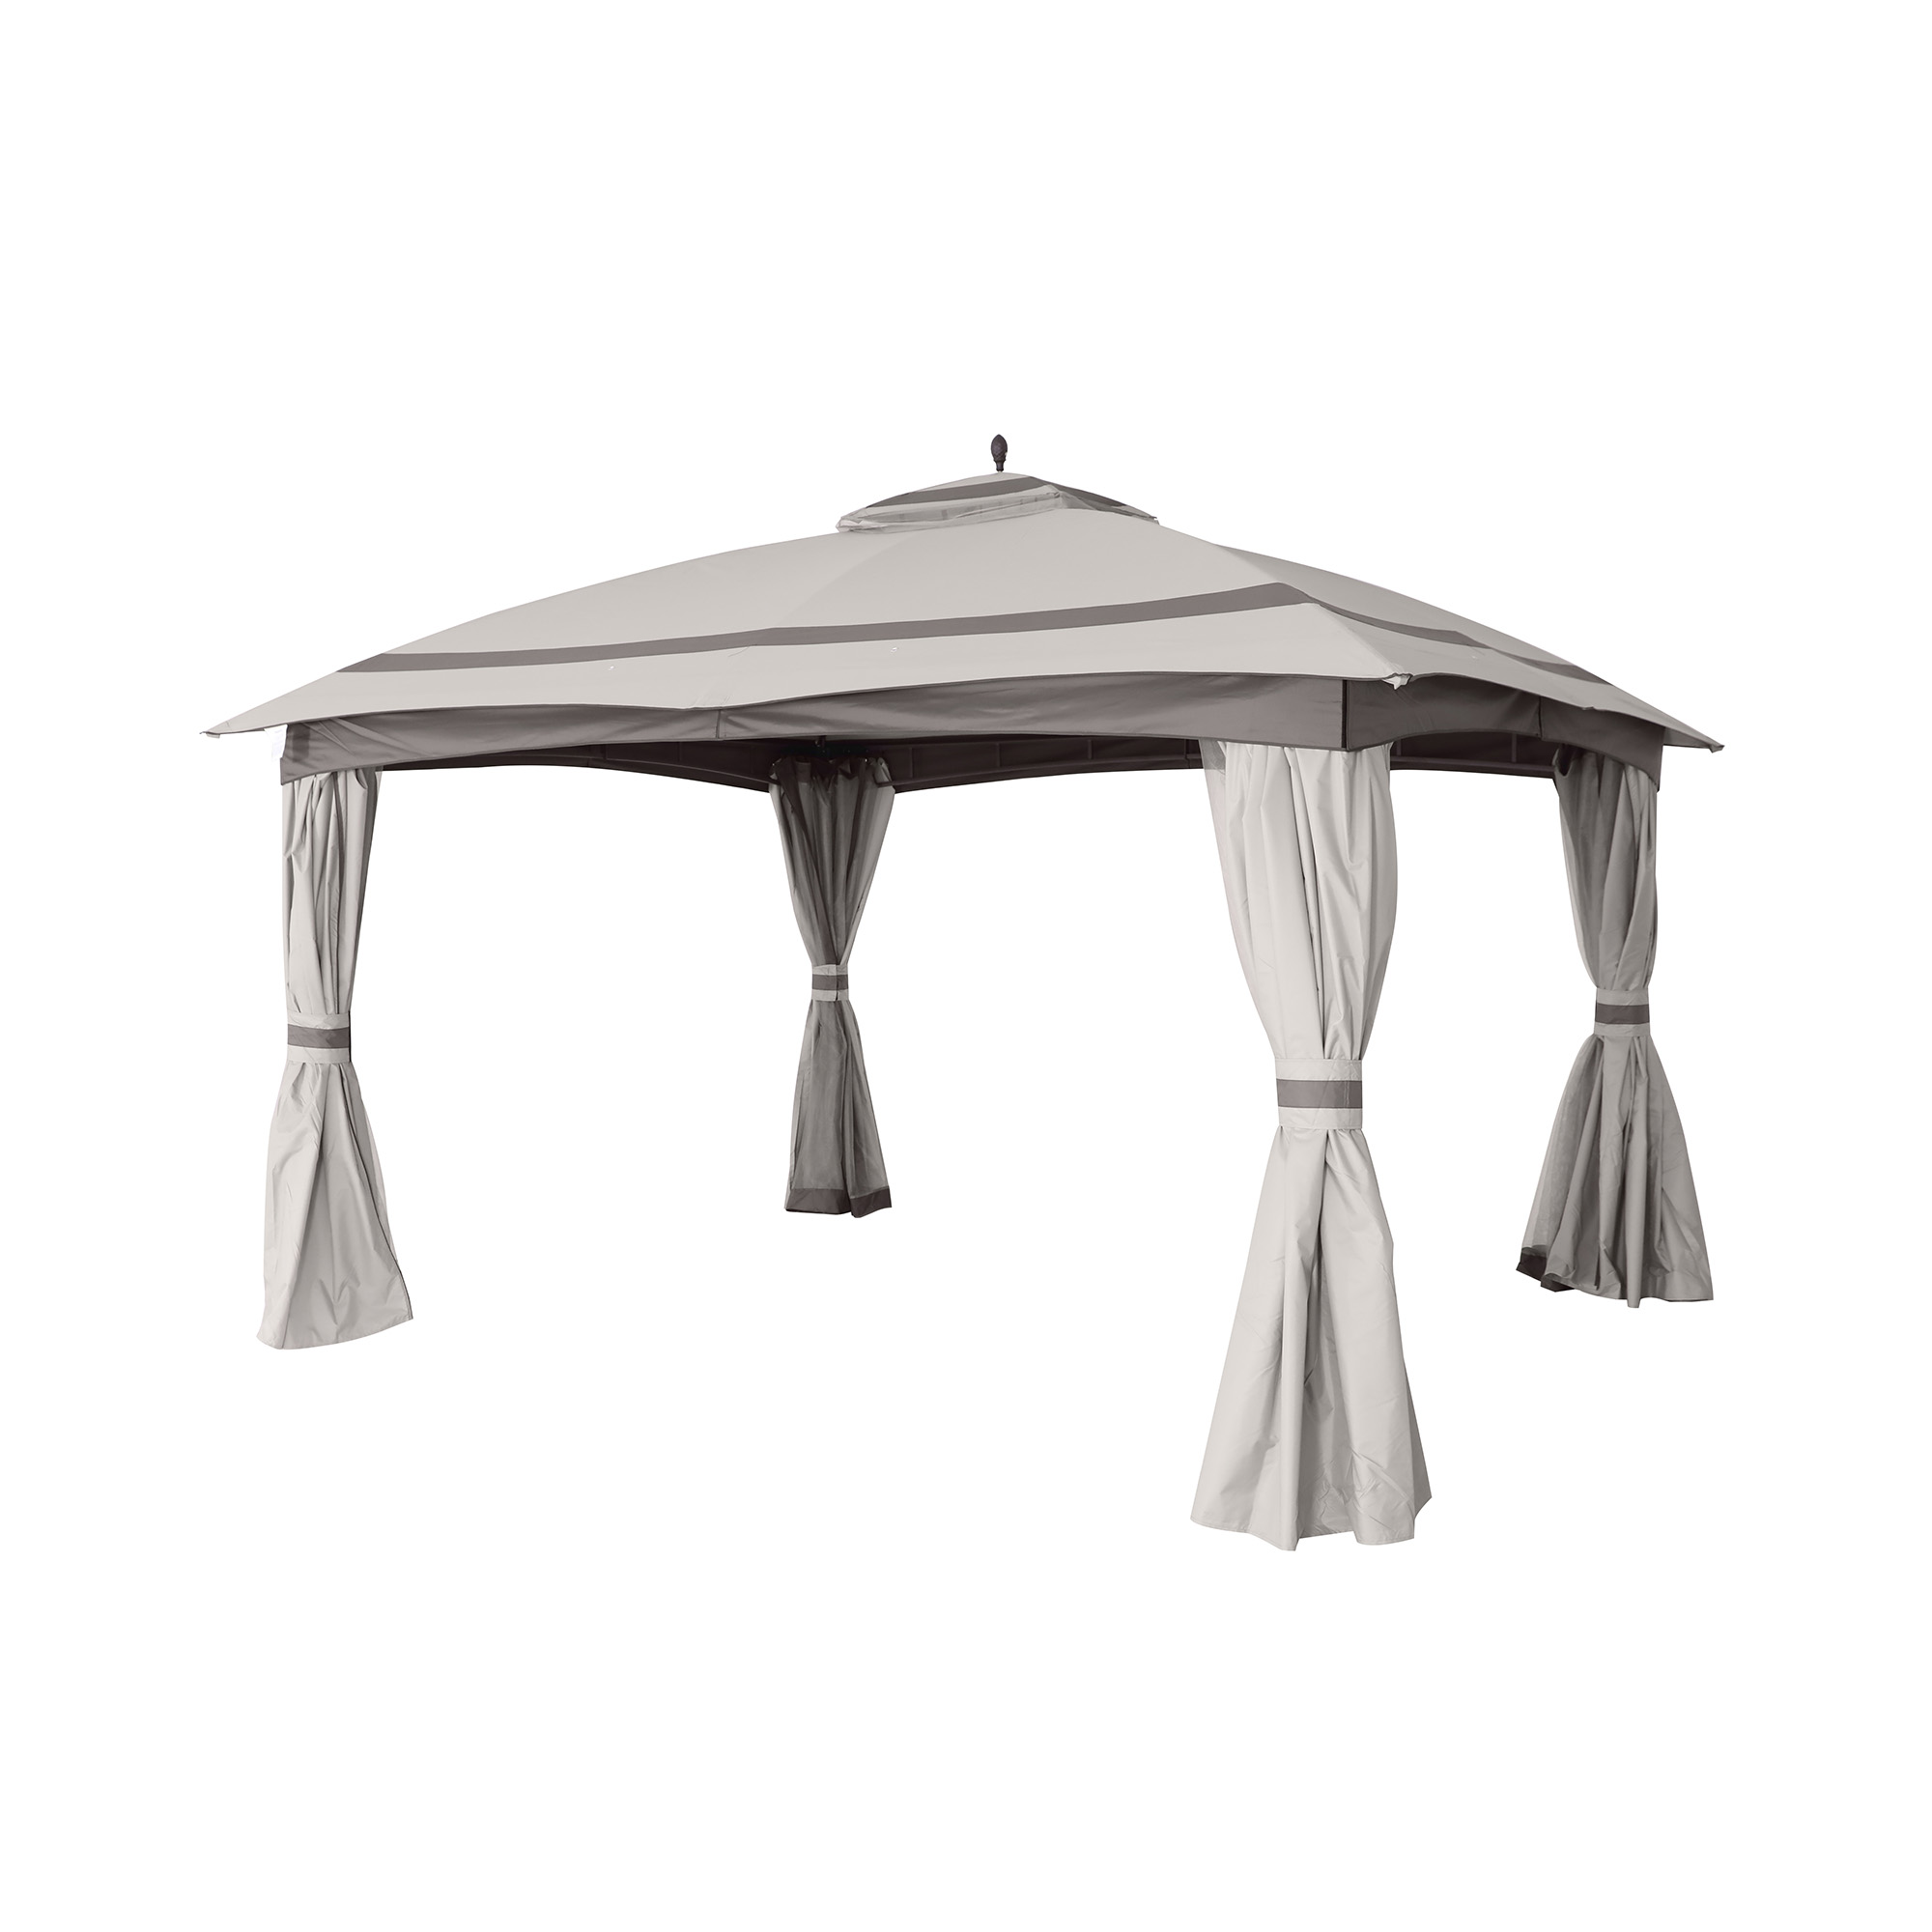 10 ft. x 12 ft.Soft-Top Steel Outdoor Patio Gazebo with Mosquito Netting